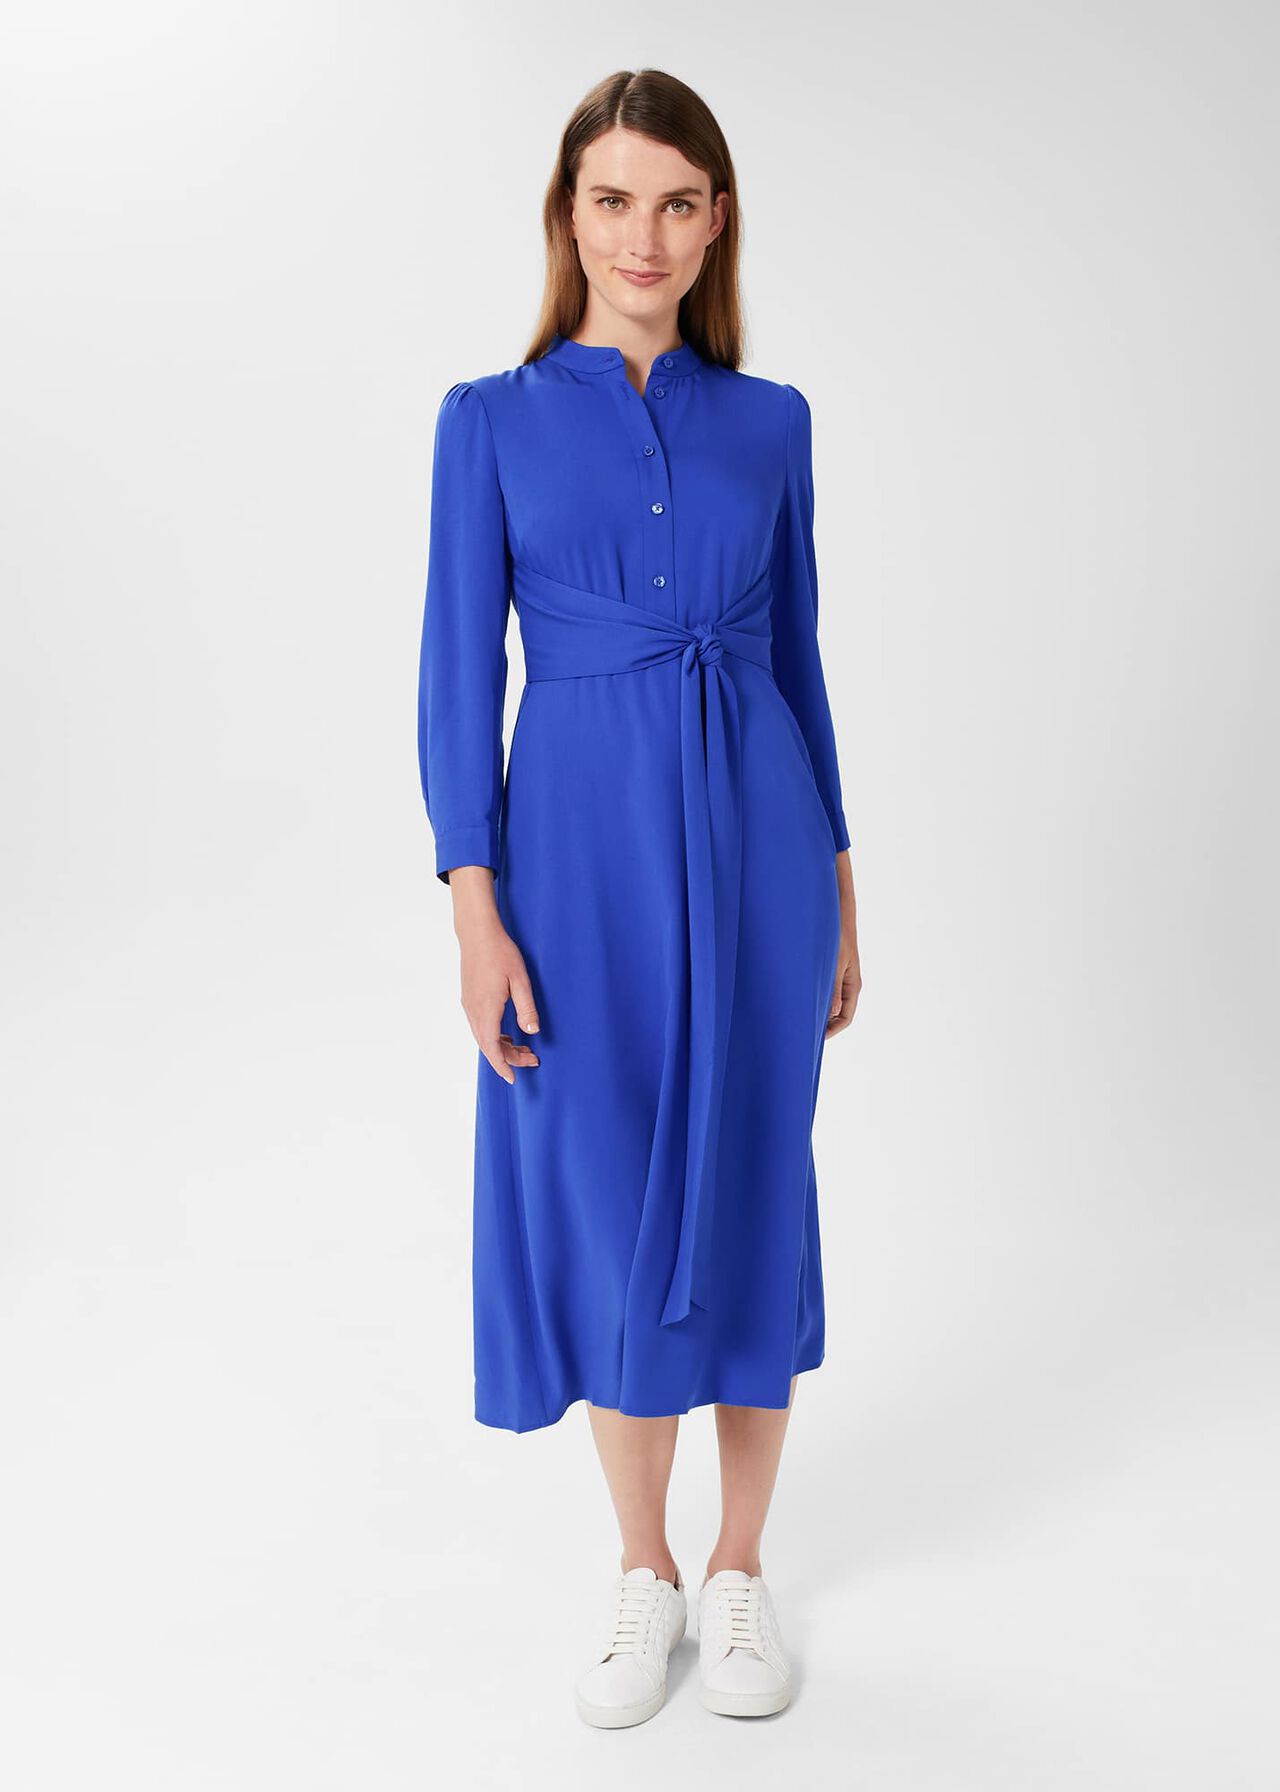 Astral Blue, Textured Fit & Flare Dress